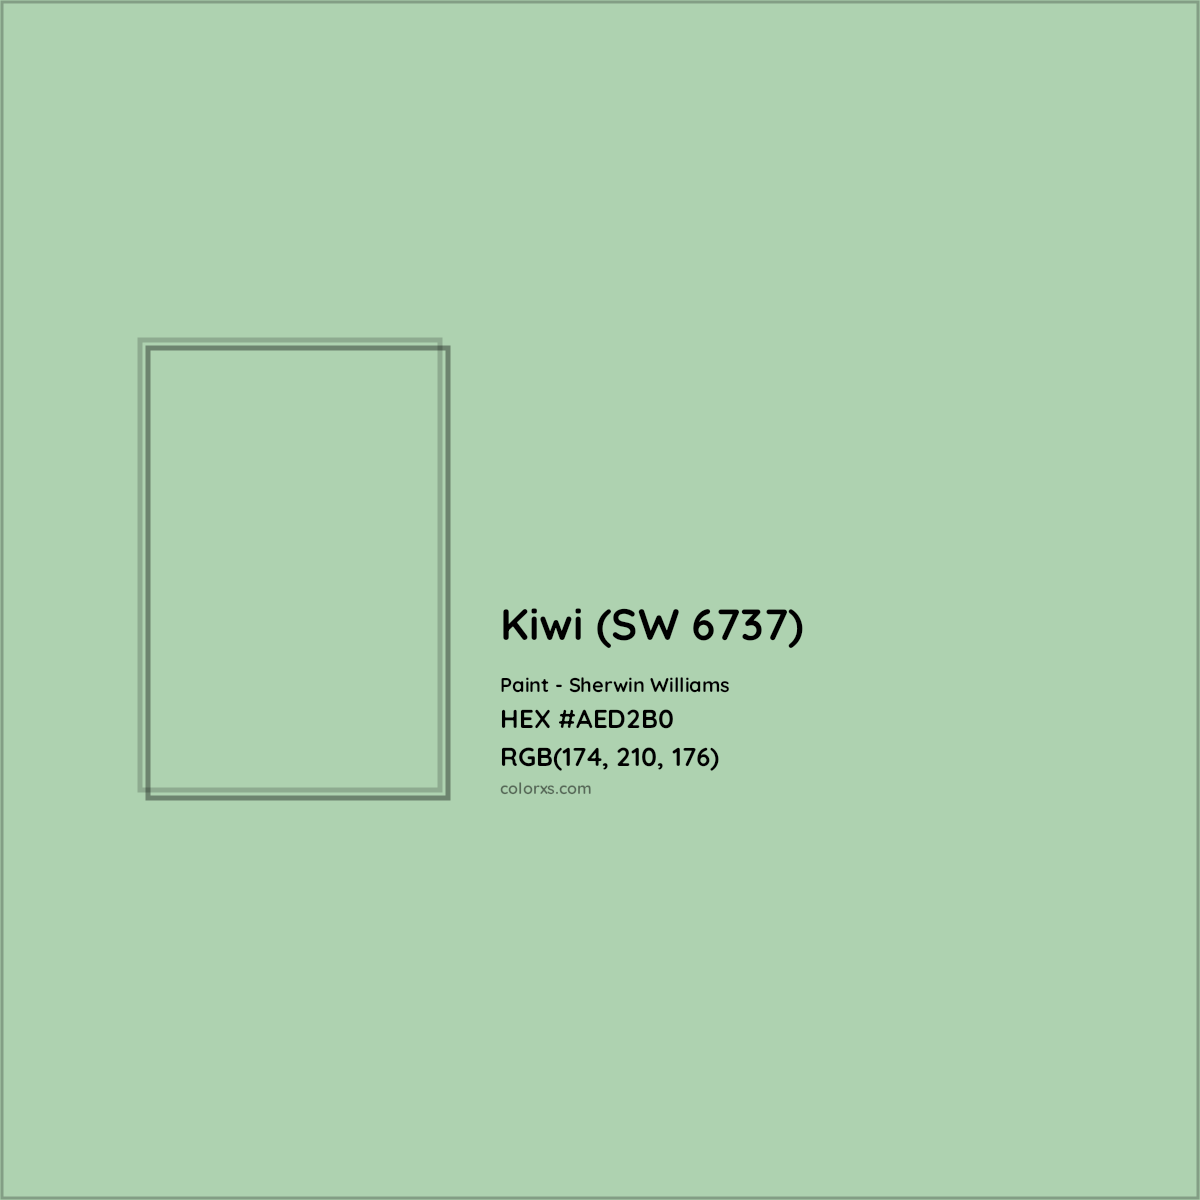 HEX #AED2B0 Kiwi (SW 6737) Paint Sherwin Williams - Color Code